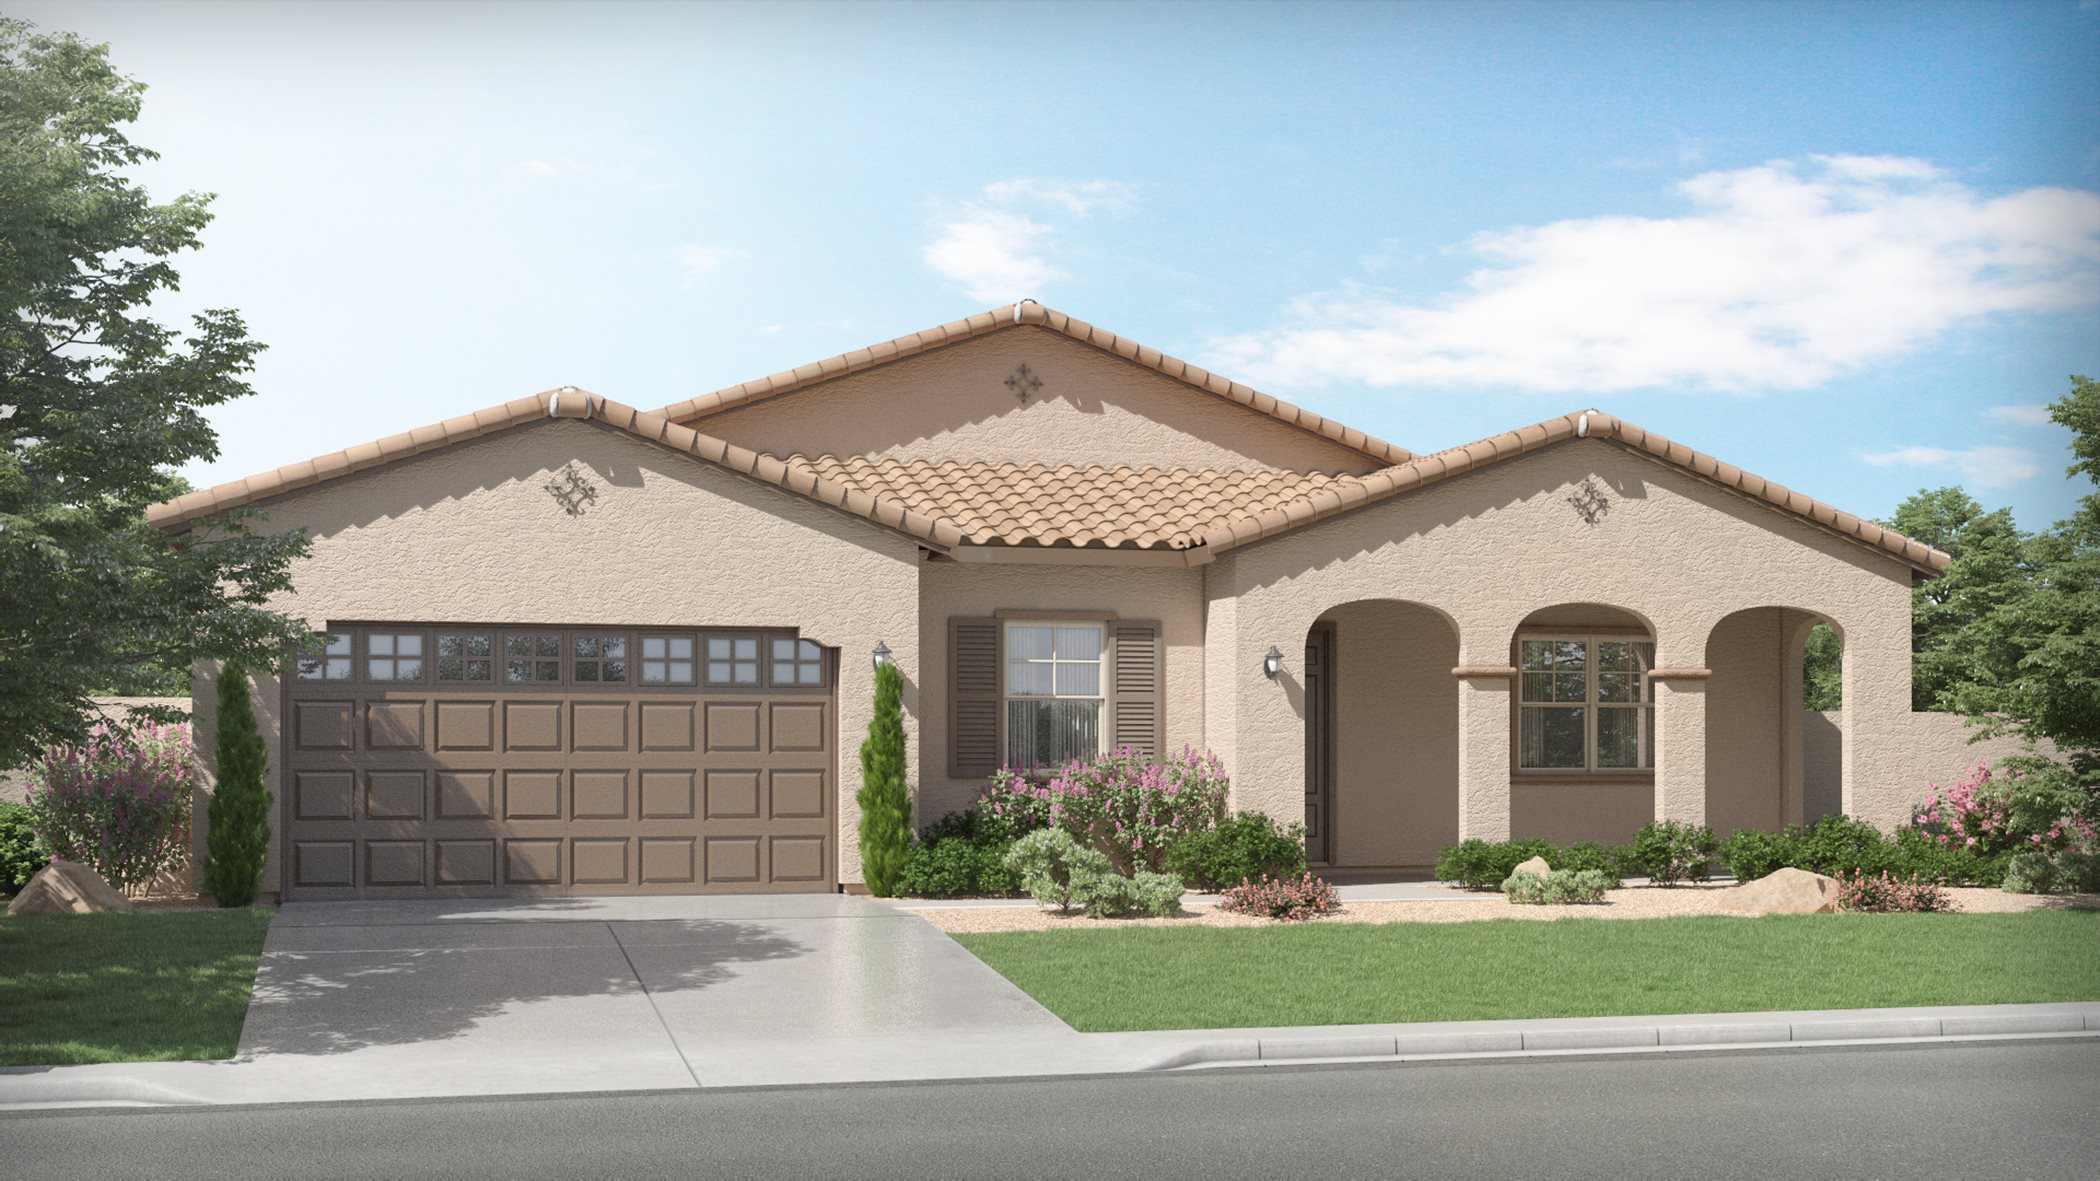 Willow Plan 5574 A Spanish Colonial